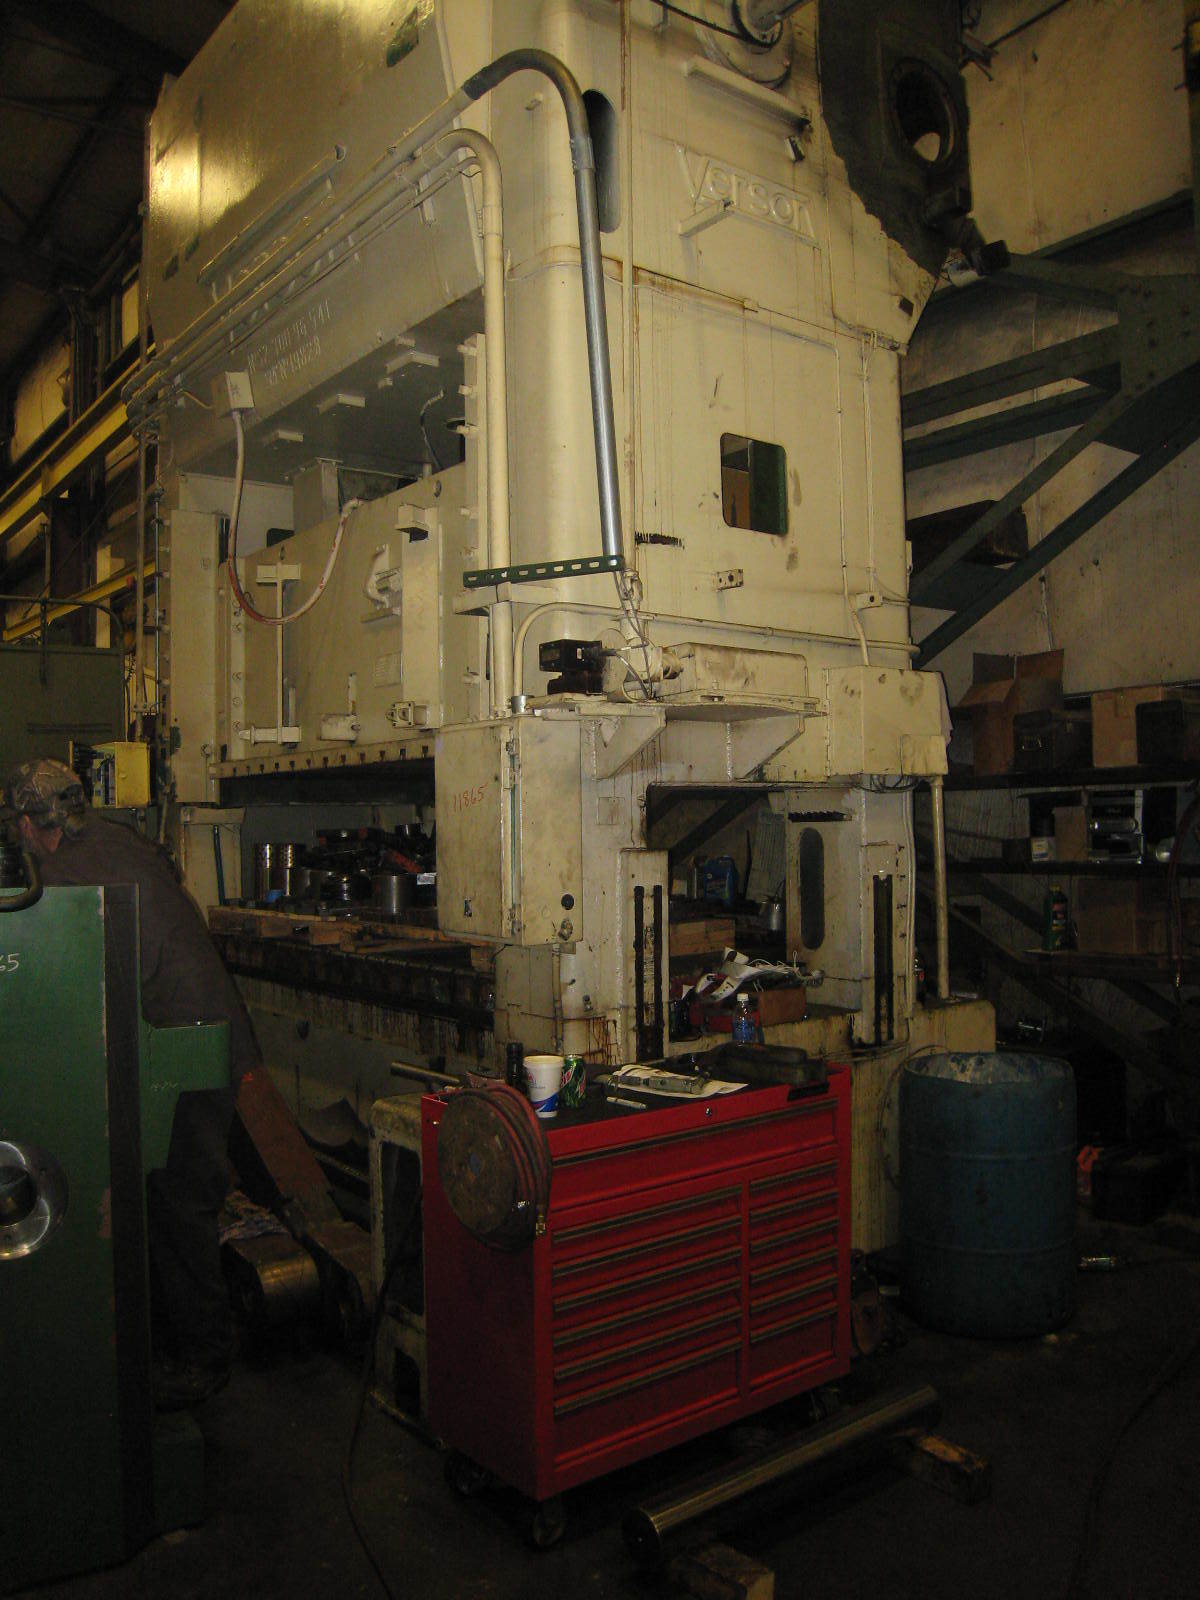 300 Ton Verson Metal Stamping Punch Press For Sale 300TVersonSSPress